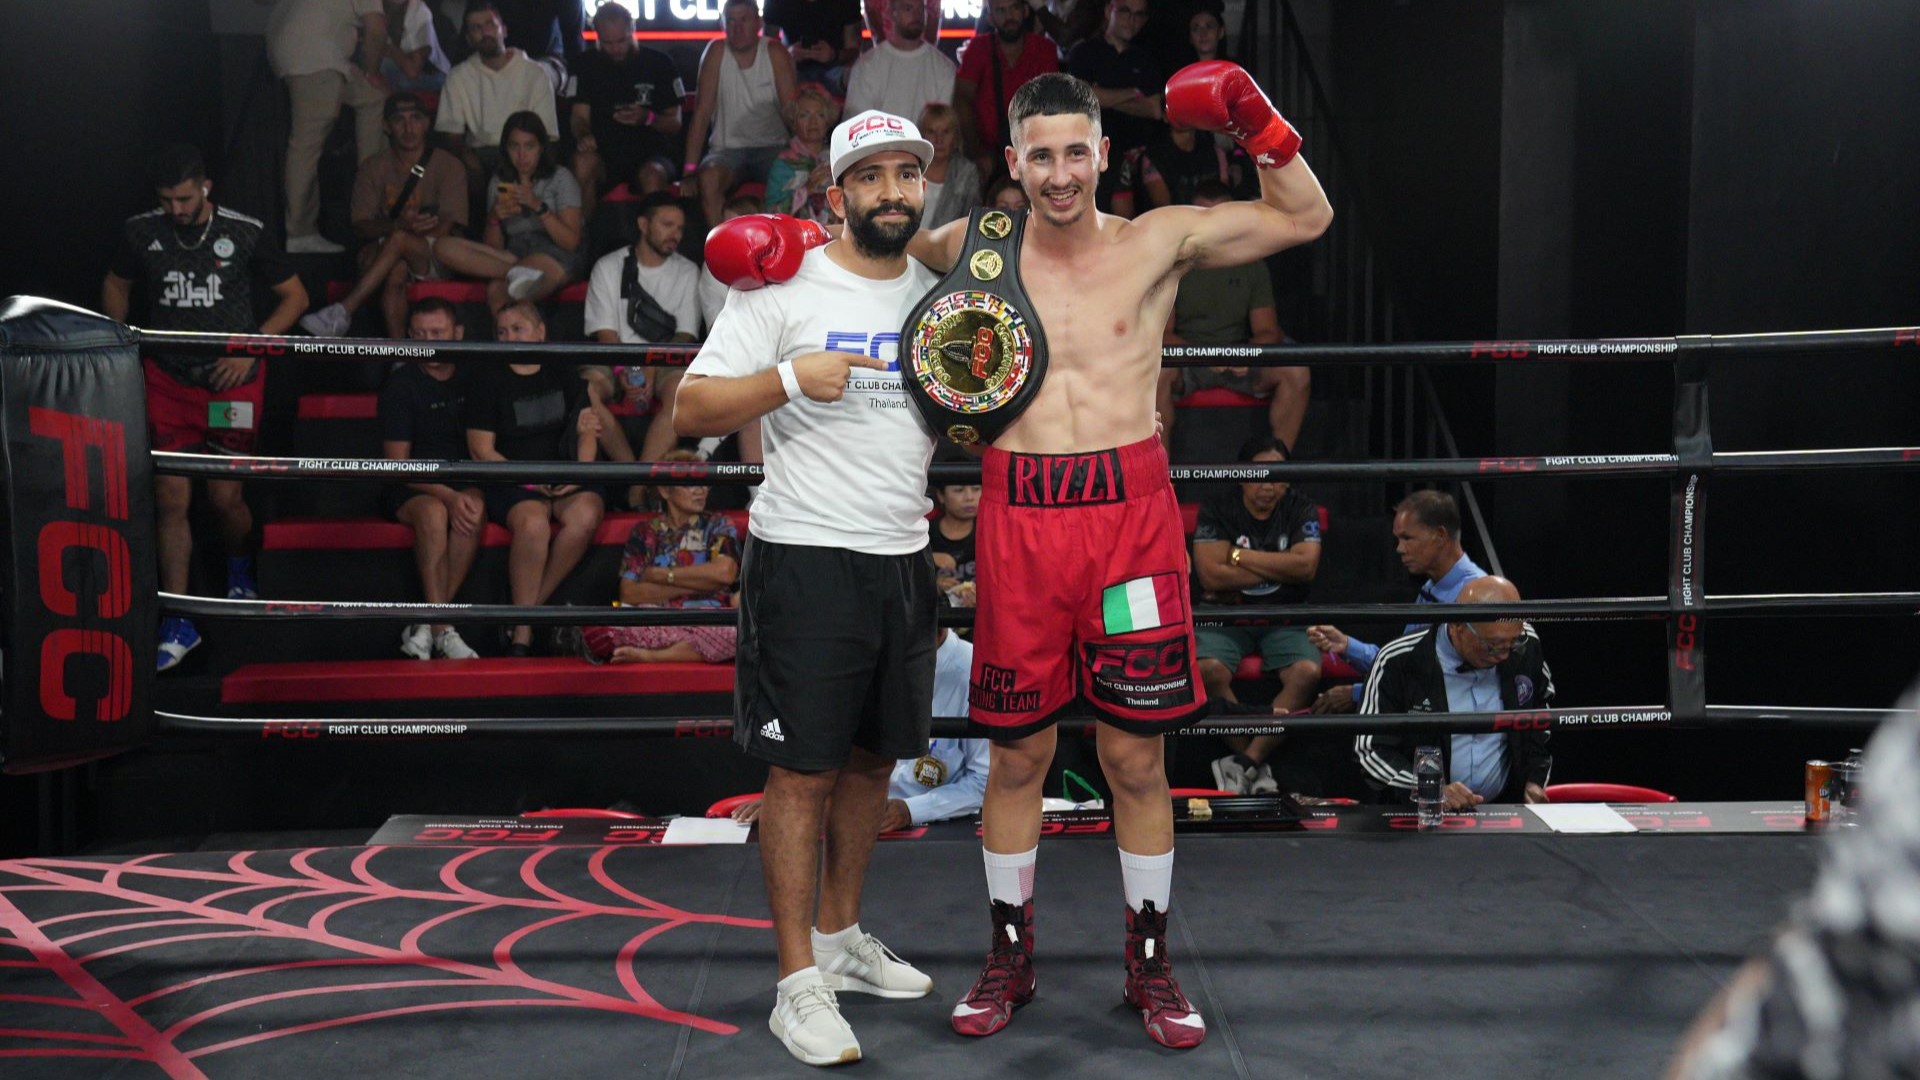 Riccardo Rizzi: TKO Victory in Thailand and Imminent Return to the Ring. This Time in Trieste!